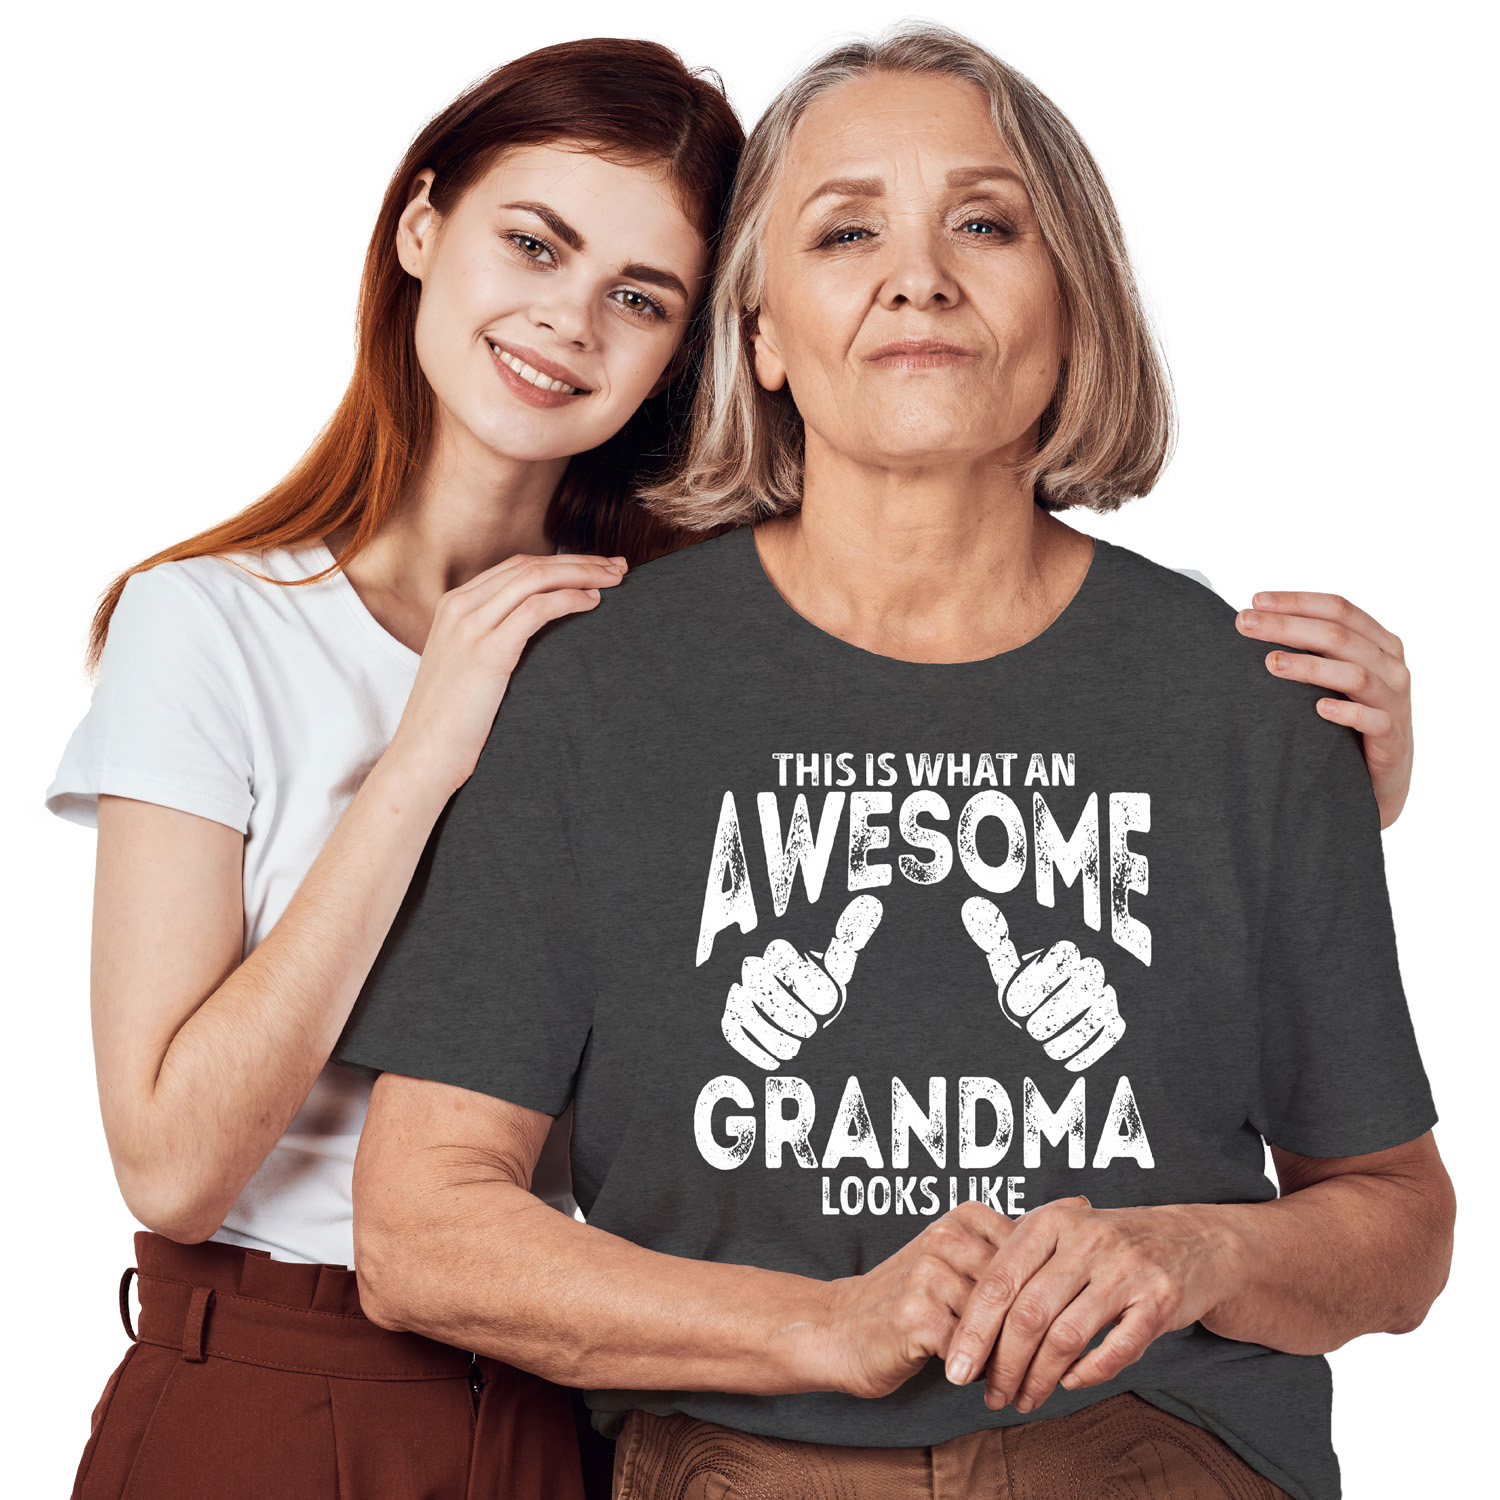 Grandma Shirt Gift, This is What an Awesome Grandma Looks Like, from Grandkids - image 1 of 2